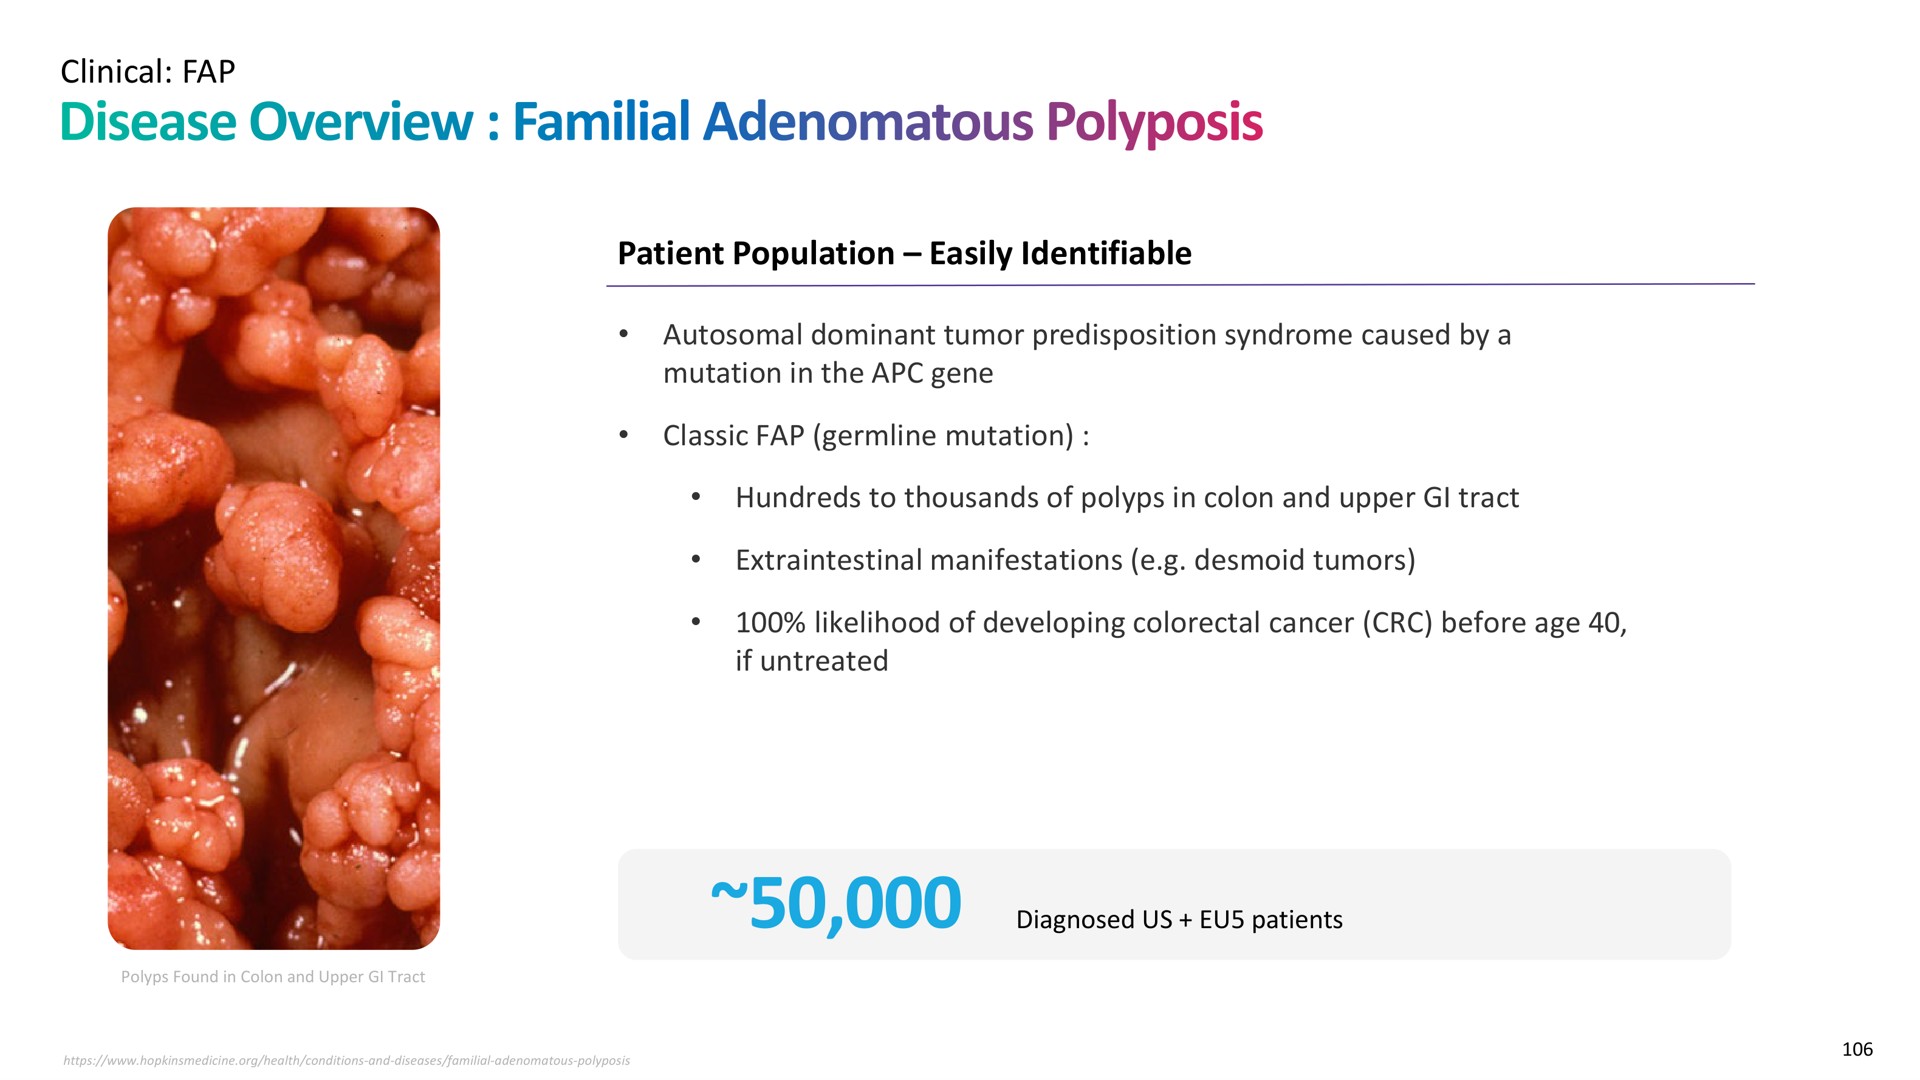 clinical patient population easily identifiable autosomal dominant tumor predisposition syndrome caused by a mutation in the gene classic mutation hundreds to thousands of polyps in colon and upper tract manifestations desmoid tumors likelihood of developing cancer before age if untreated disease overview familial adenomatous polyposis | Recursion Pharmaceuticals